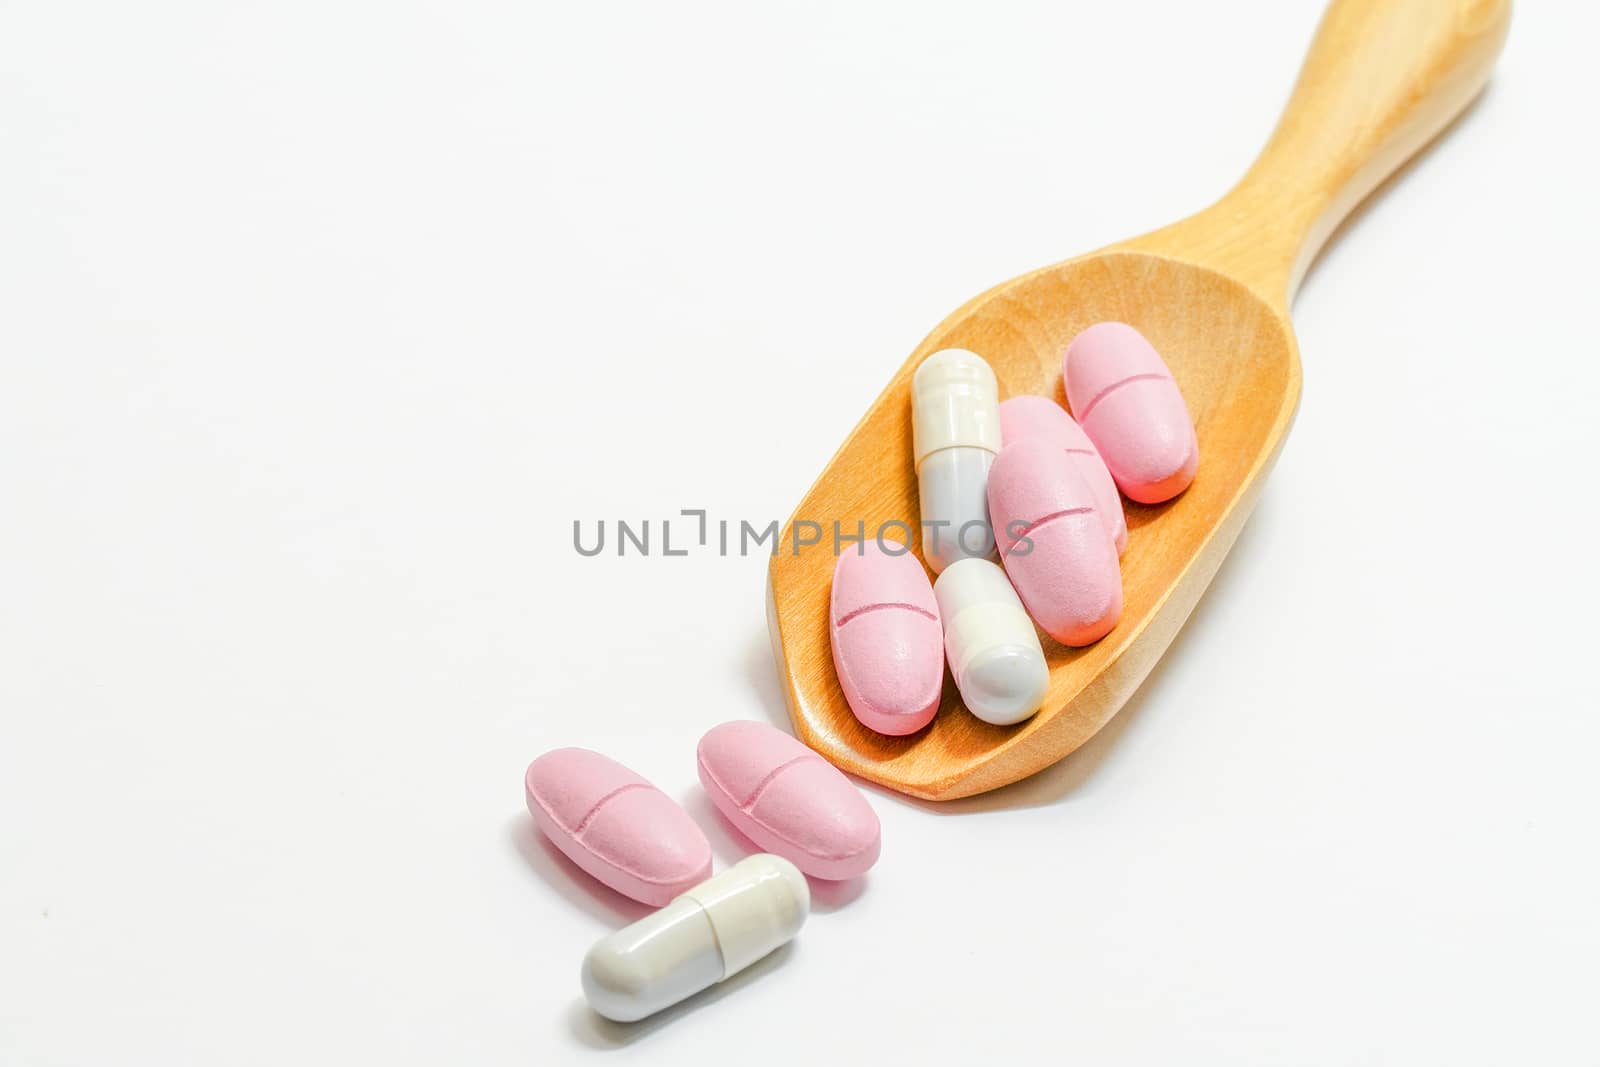 Medicine on a wooden spoon and on a white background